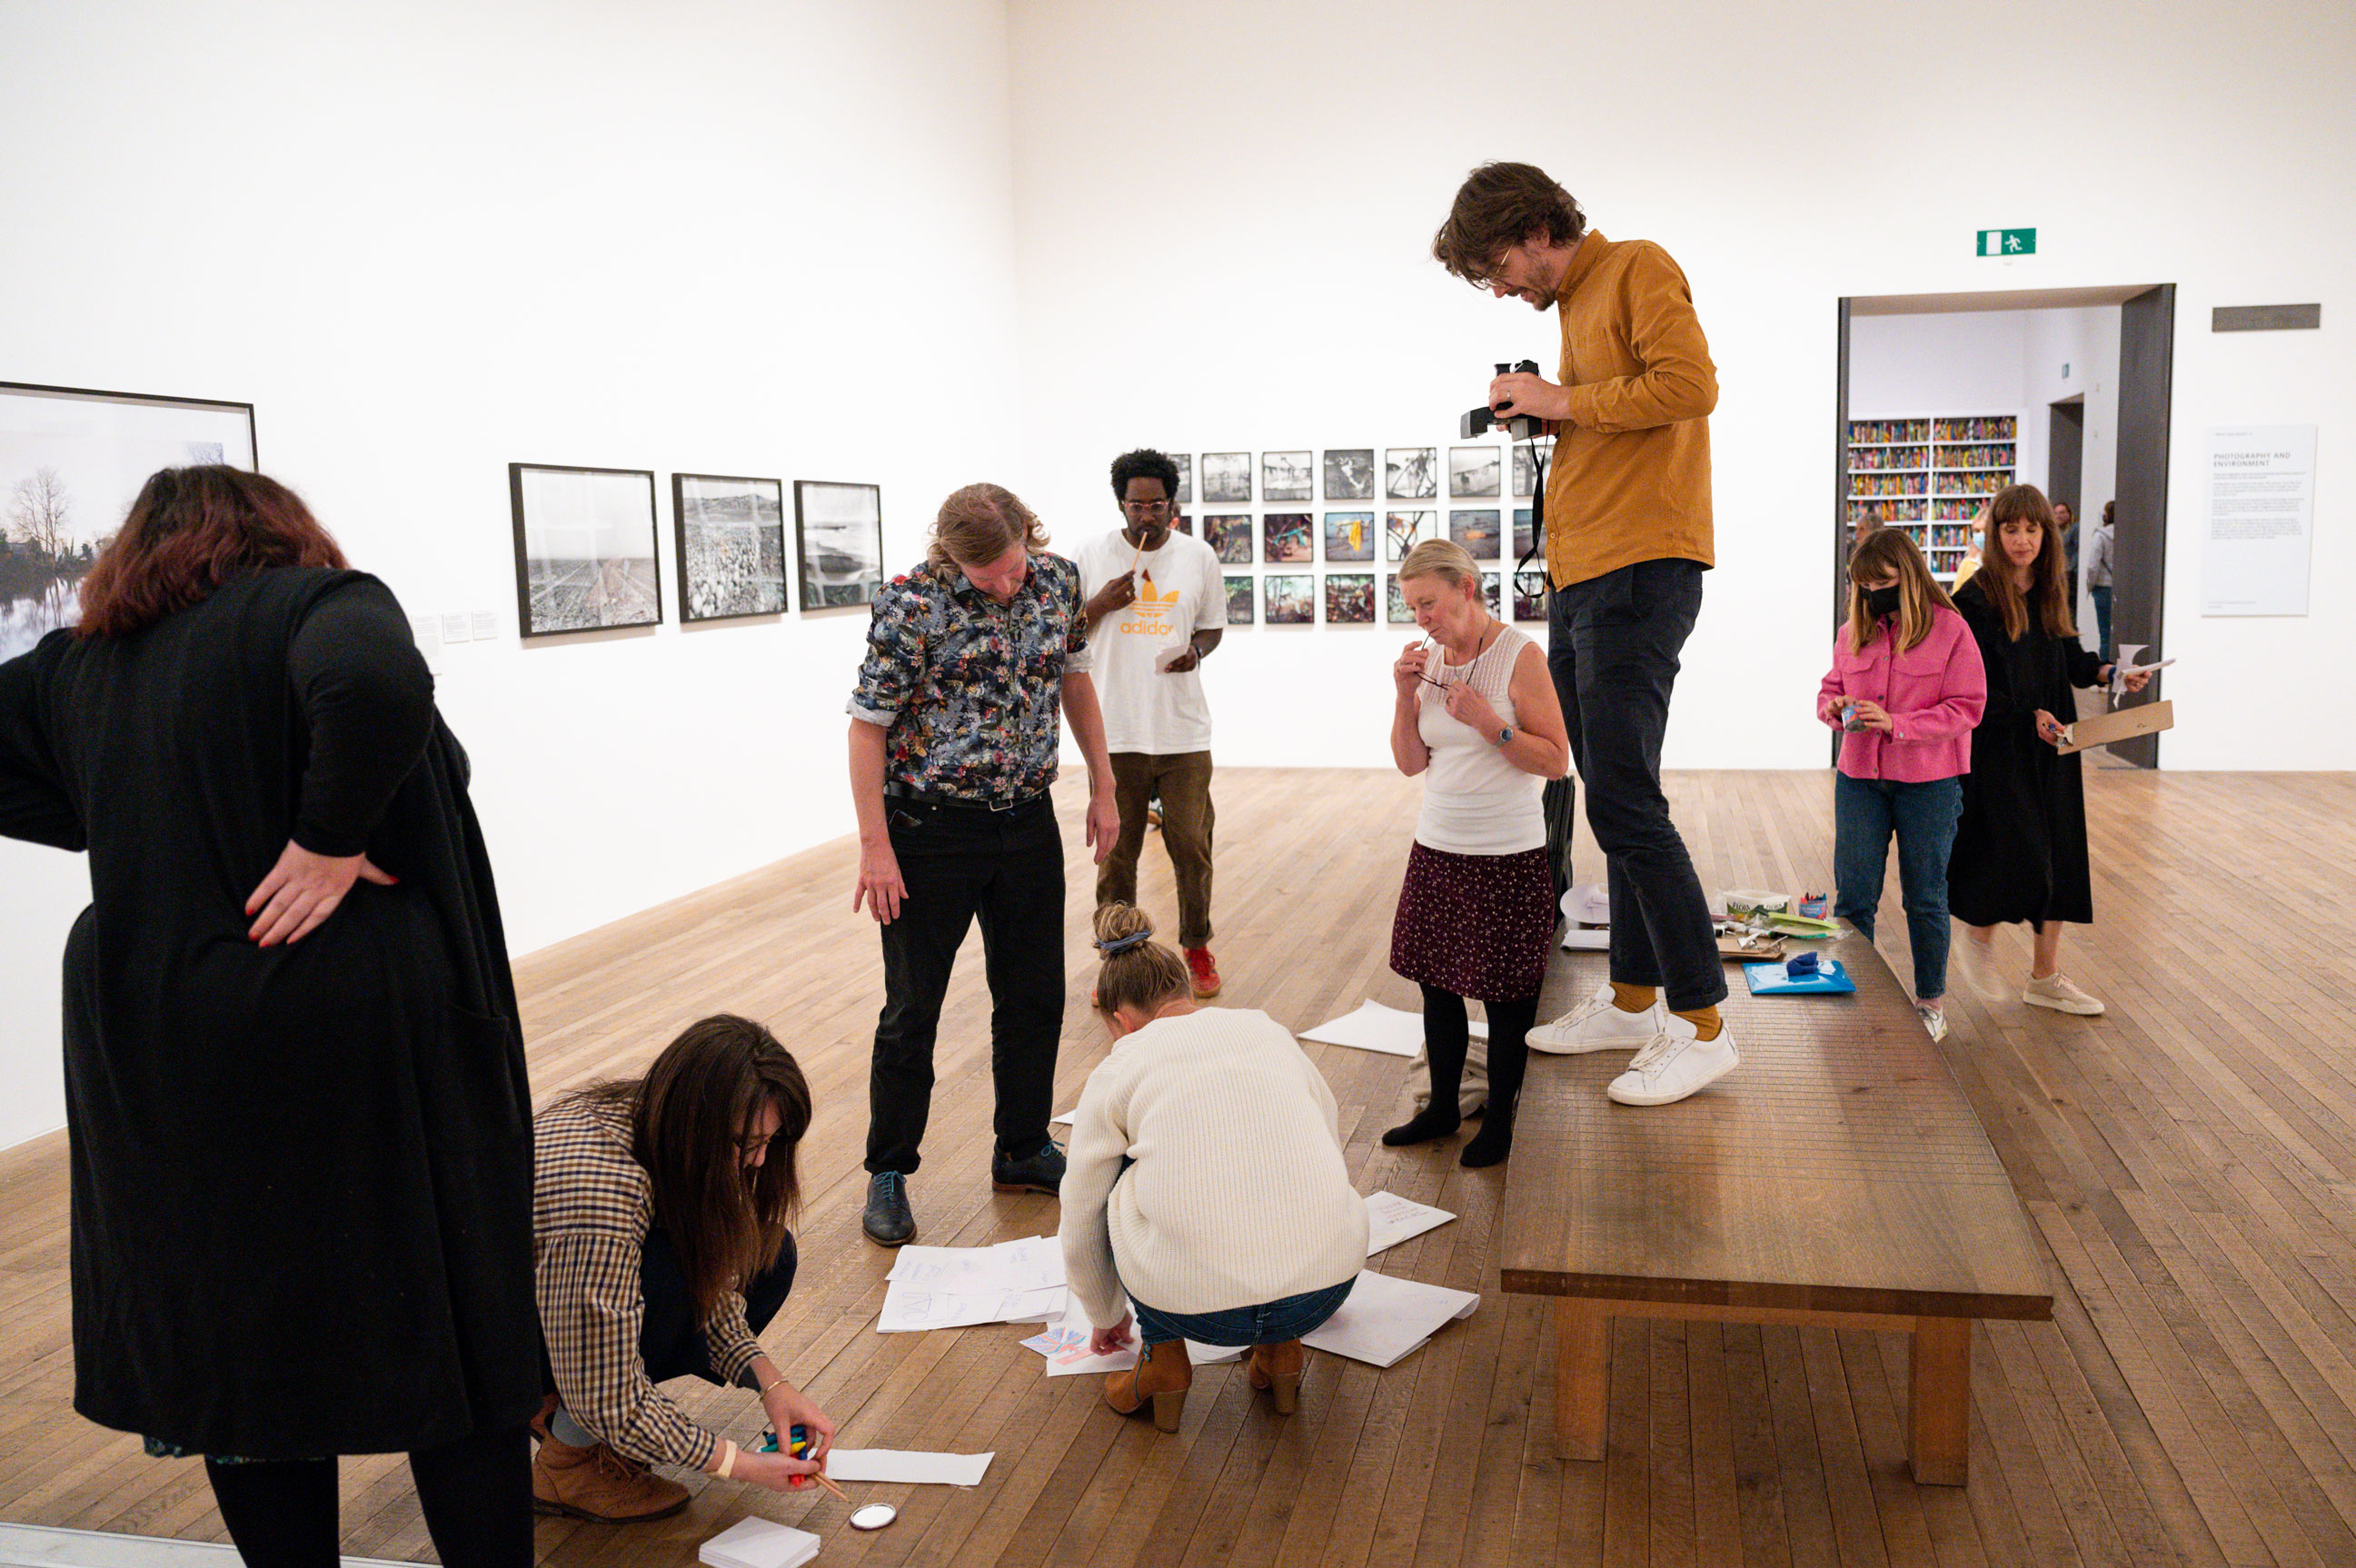 A group of people partaking in an activity in an exhibition space. Some people sitting on the floor, standing and standing on a stool